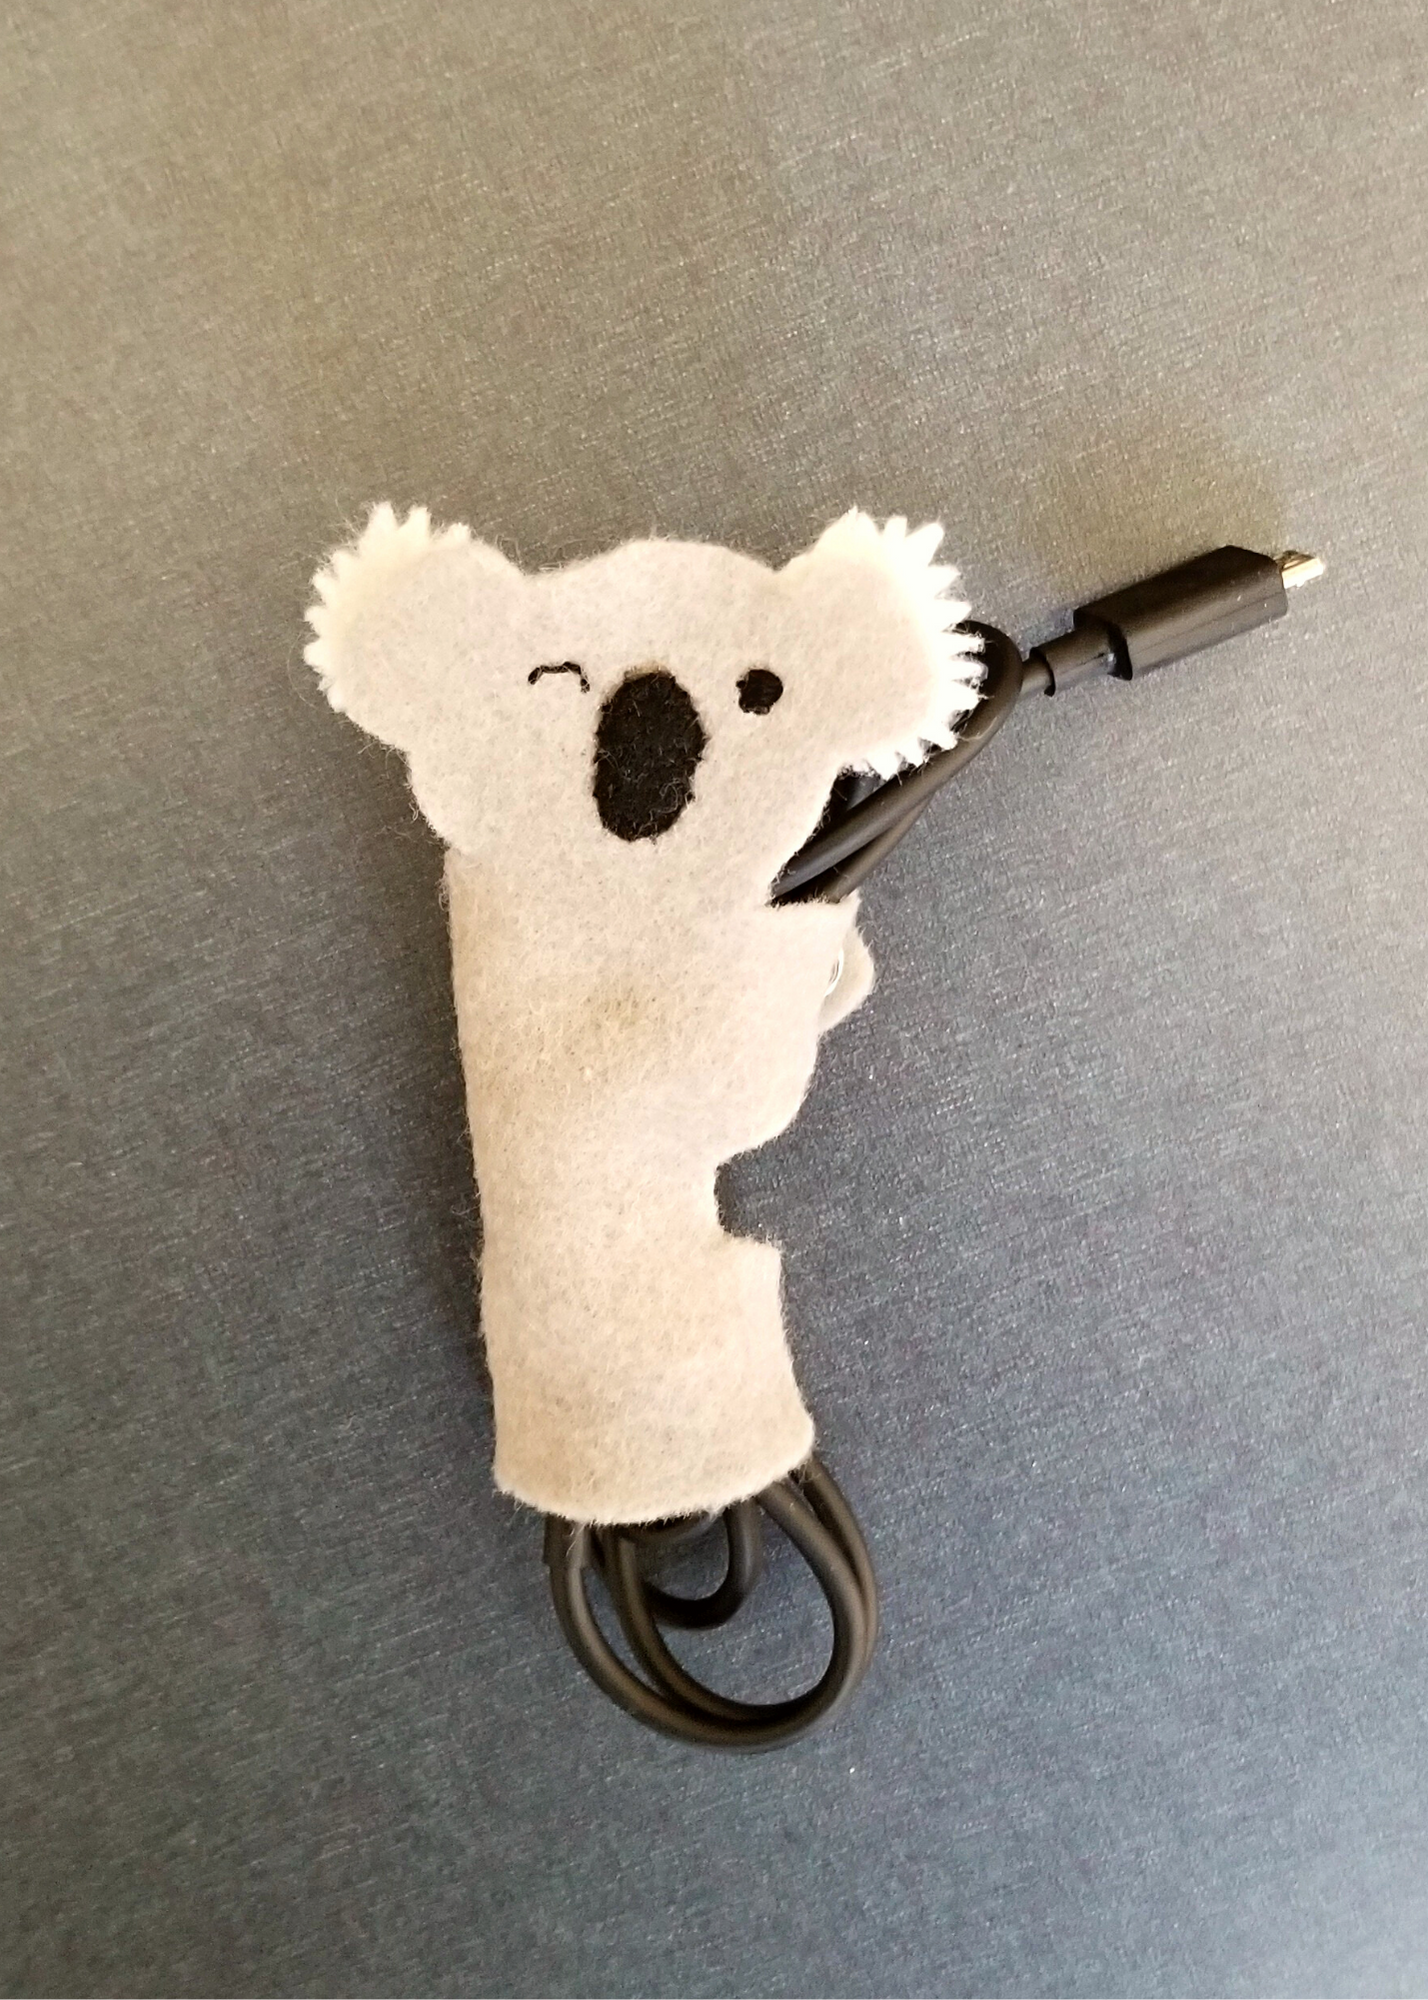 A gray felt koala with a winky face who is using its arms and legs to wind up a charging cord